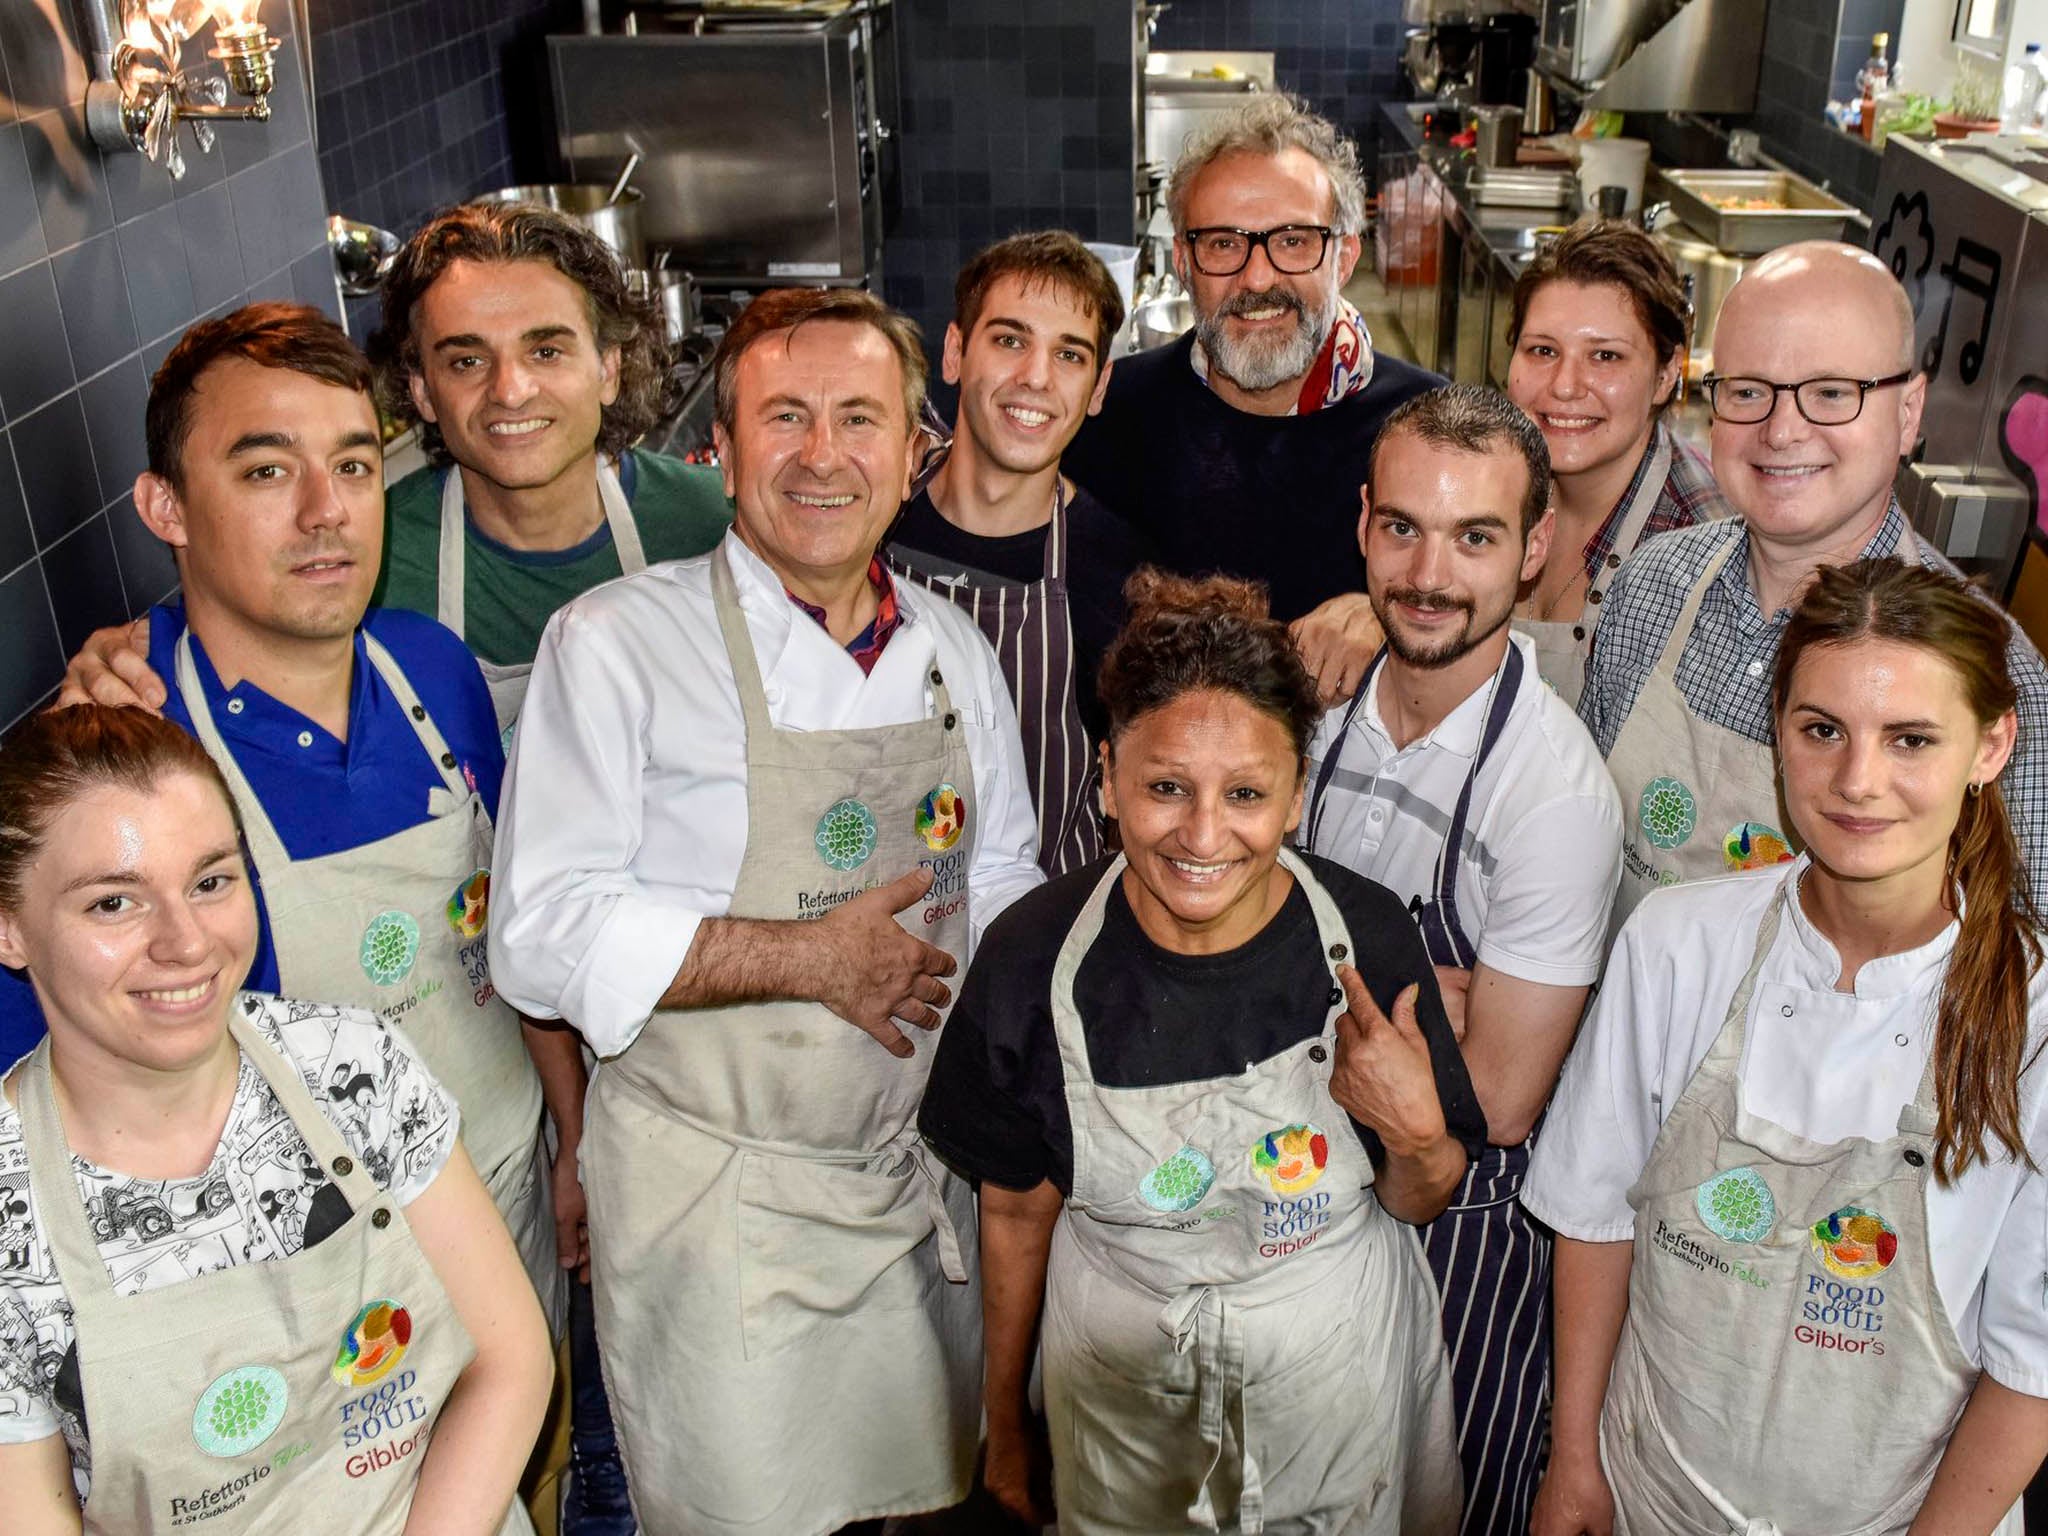 Refettorio Felix founder, Massimo Bottura, and his team serve food in west London